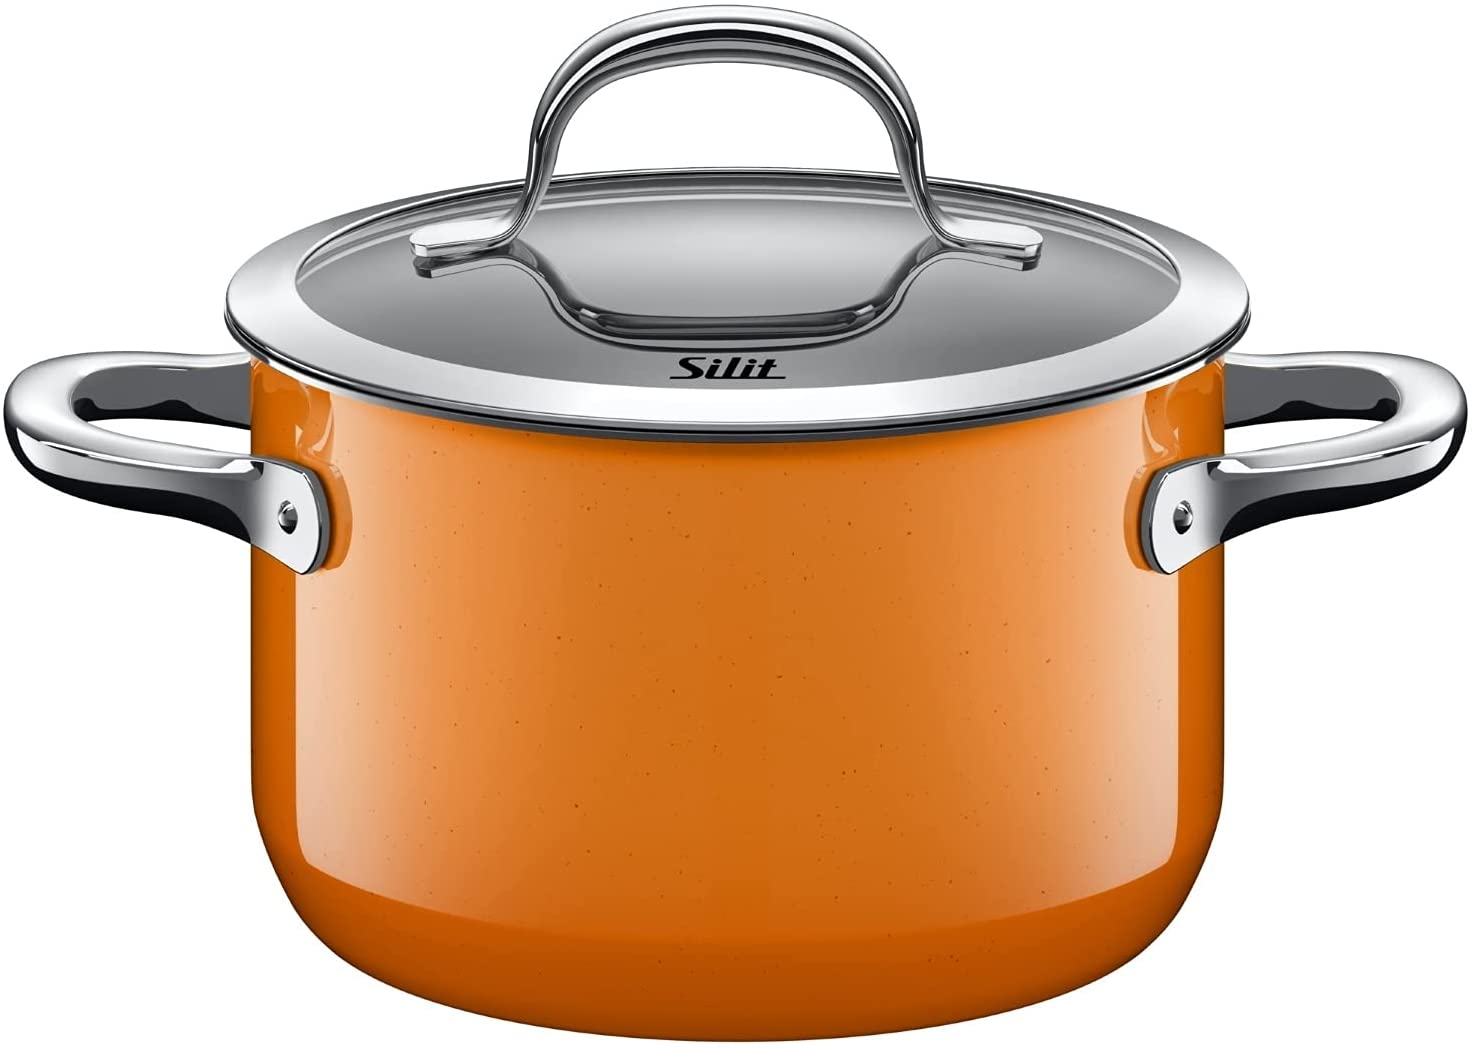 Silit Passion Orange Saucepan Tall with Glass Lid Diameter 16 cm Silargan Functional Ceramic Pouring Rim Suitable for Induction Cookers 2 L